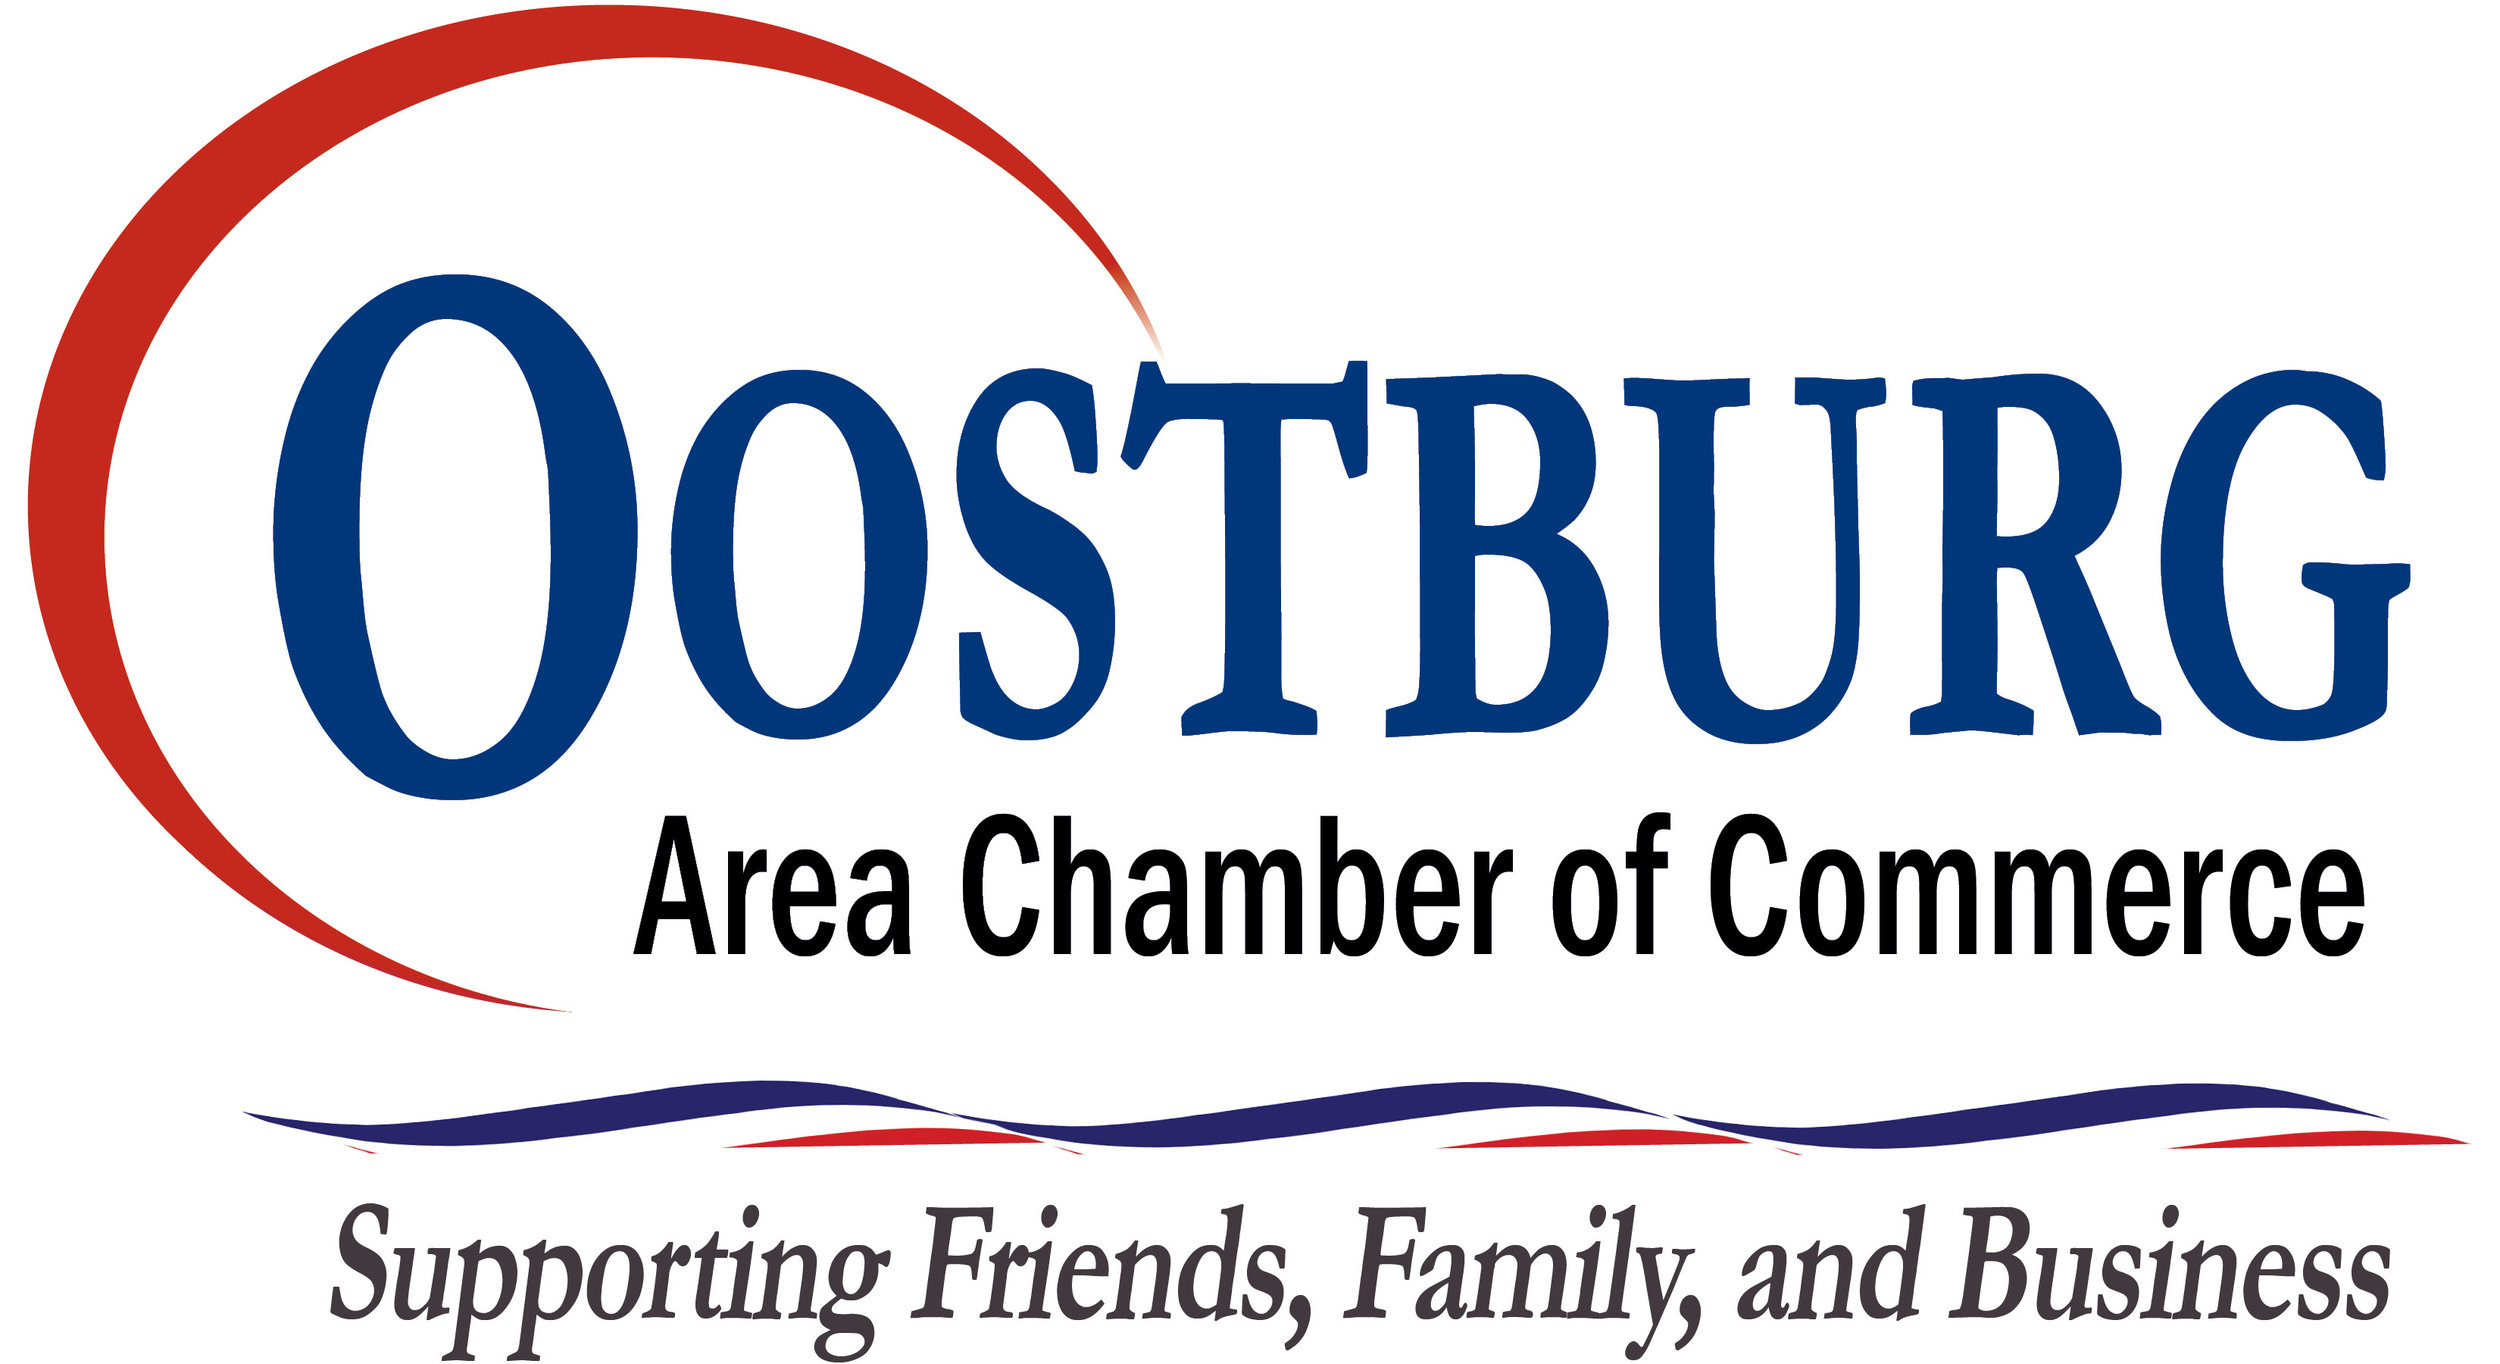 Oostburg Area Chamber of Commerce